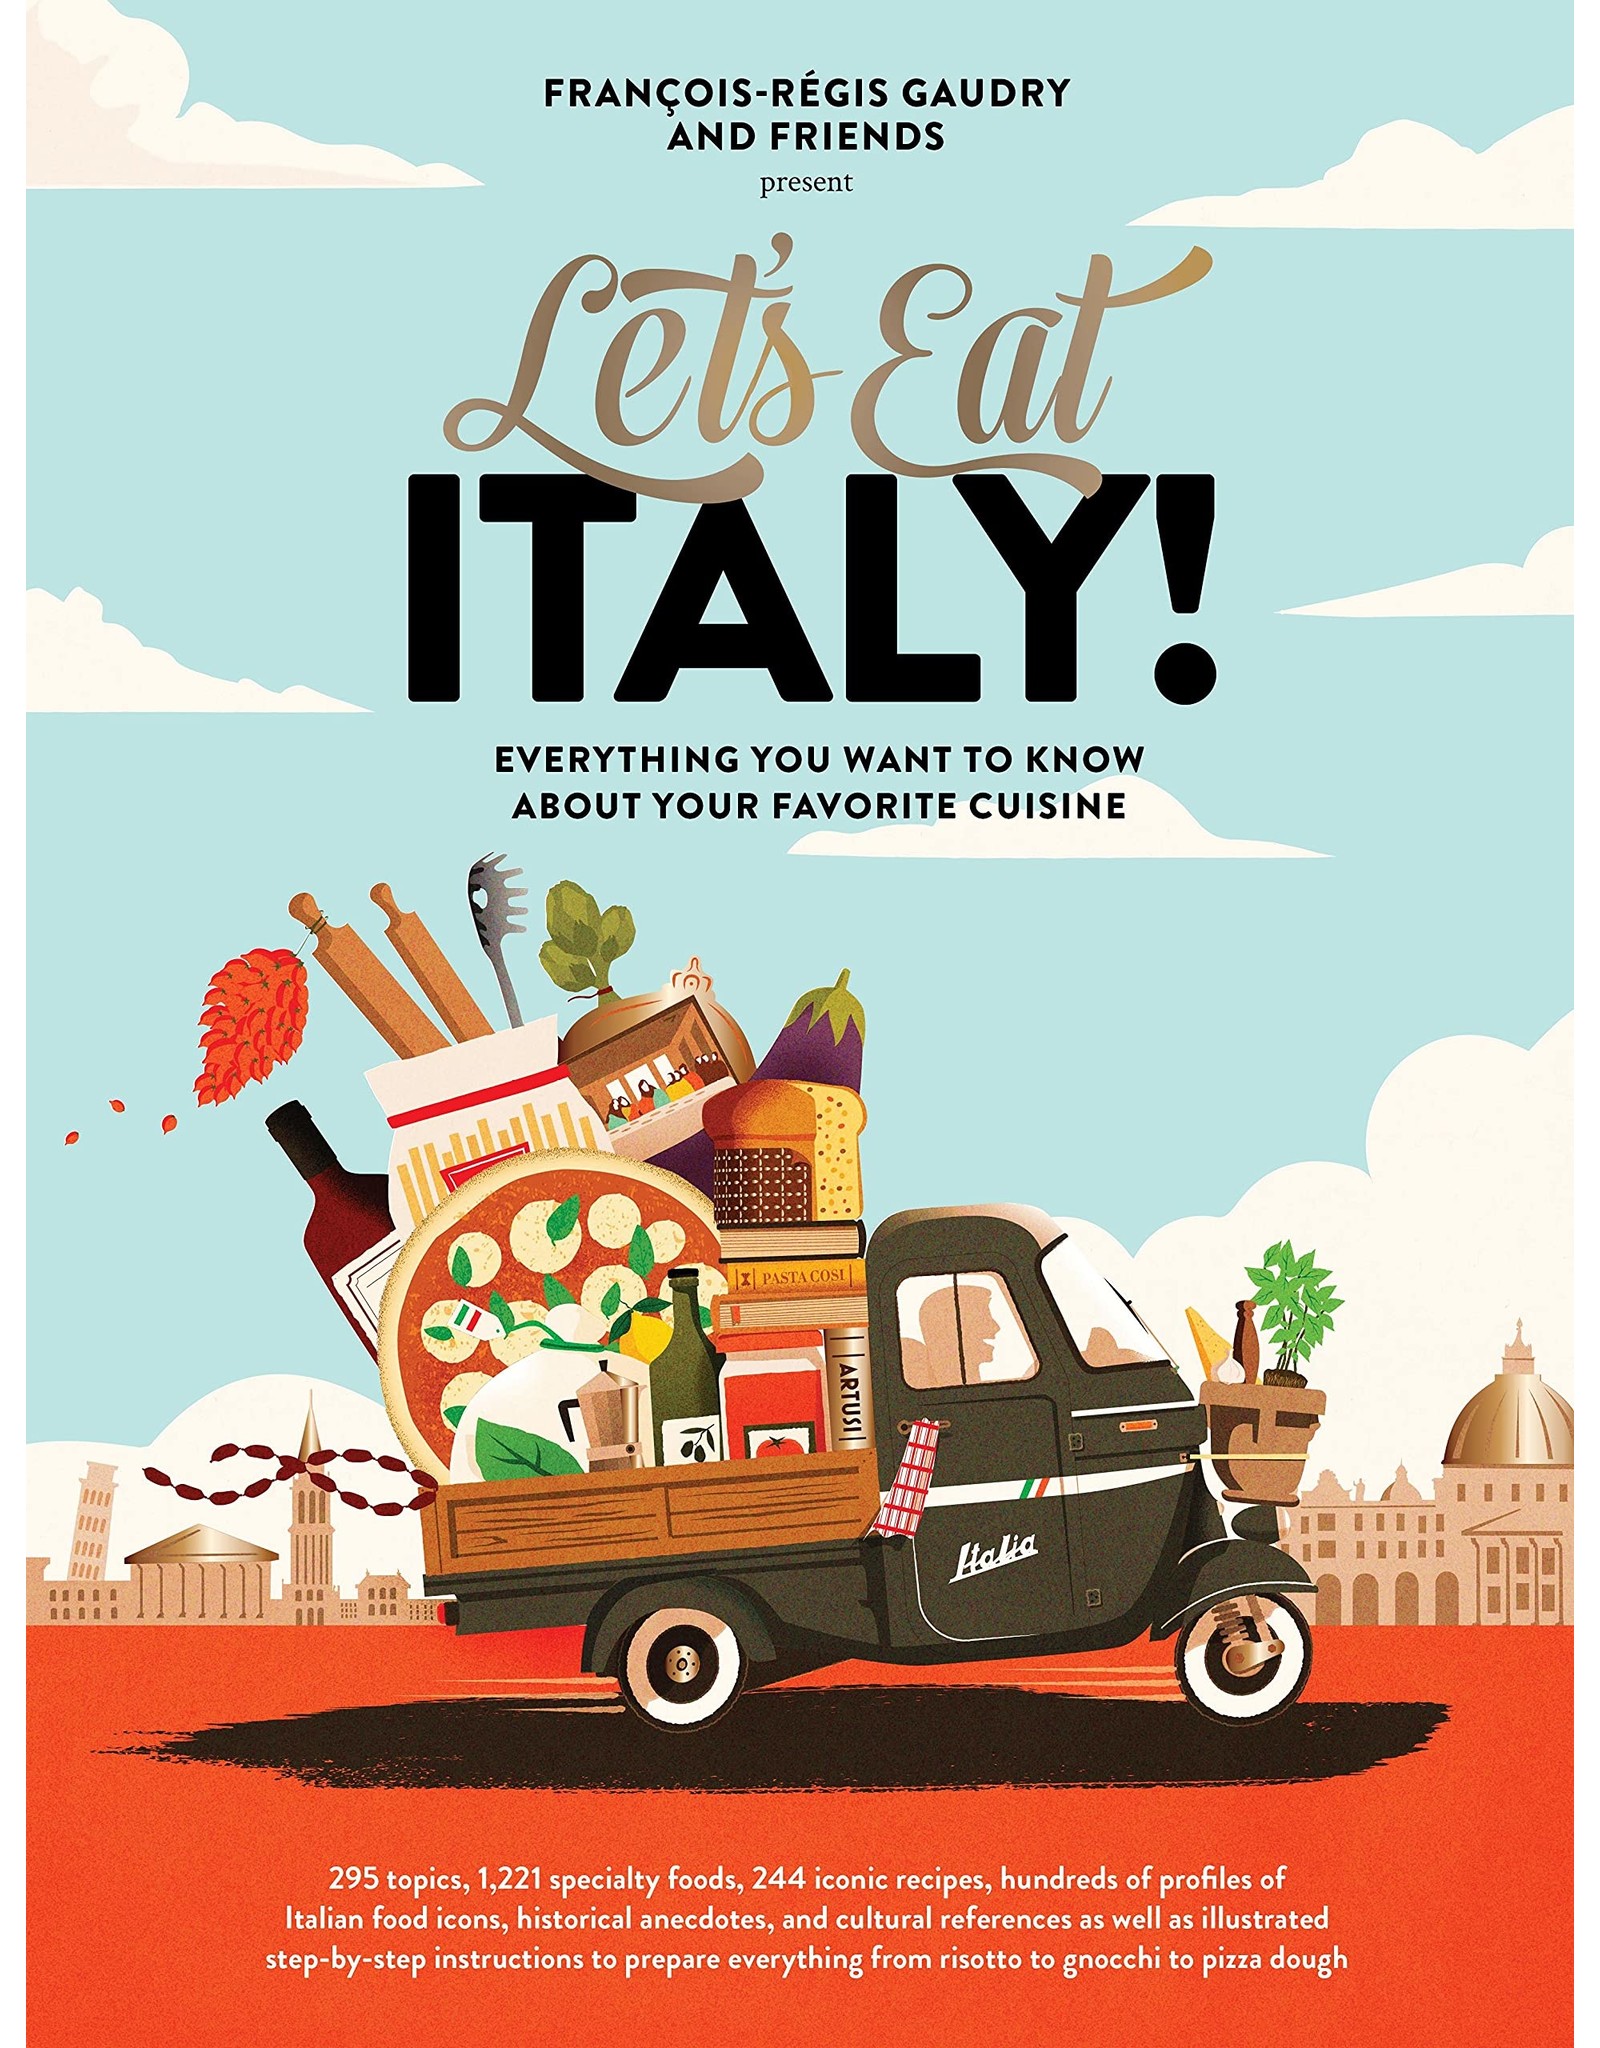 Let's Eat Italy